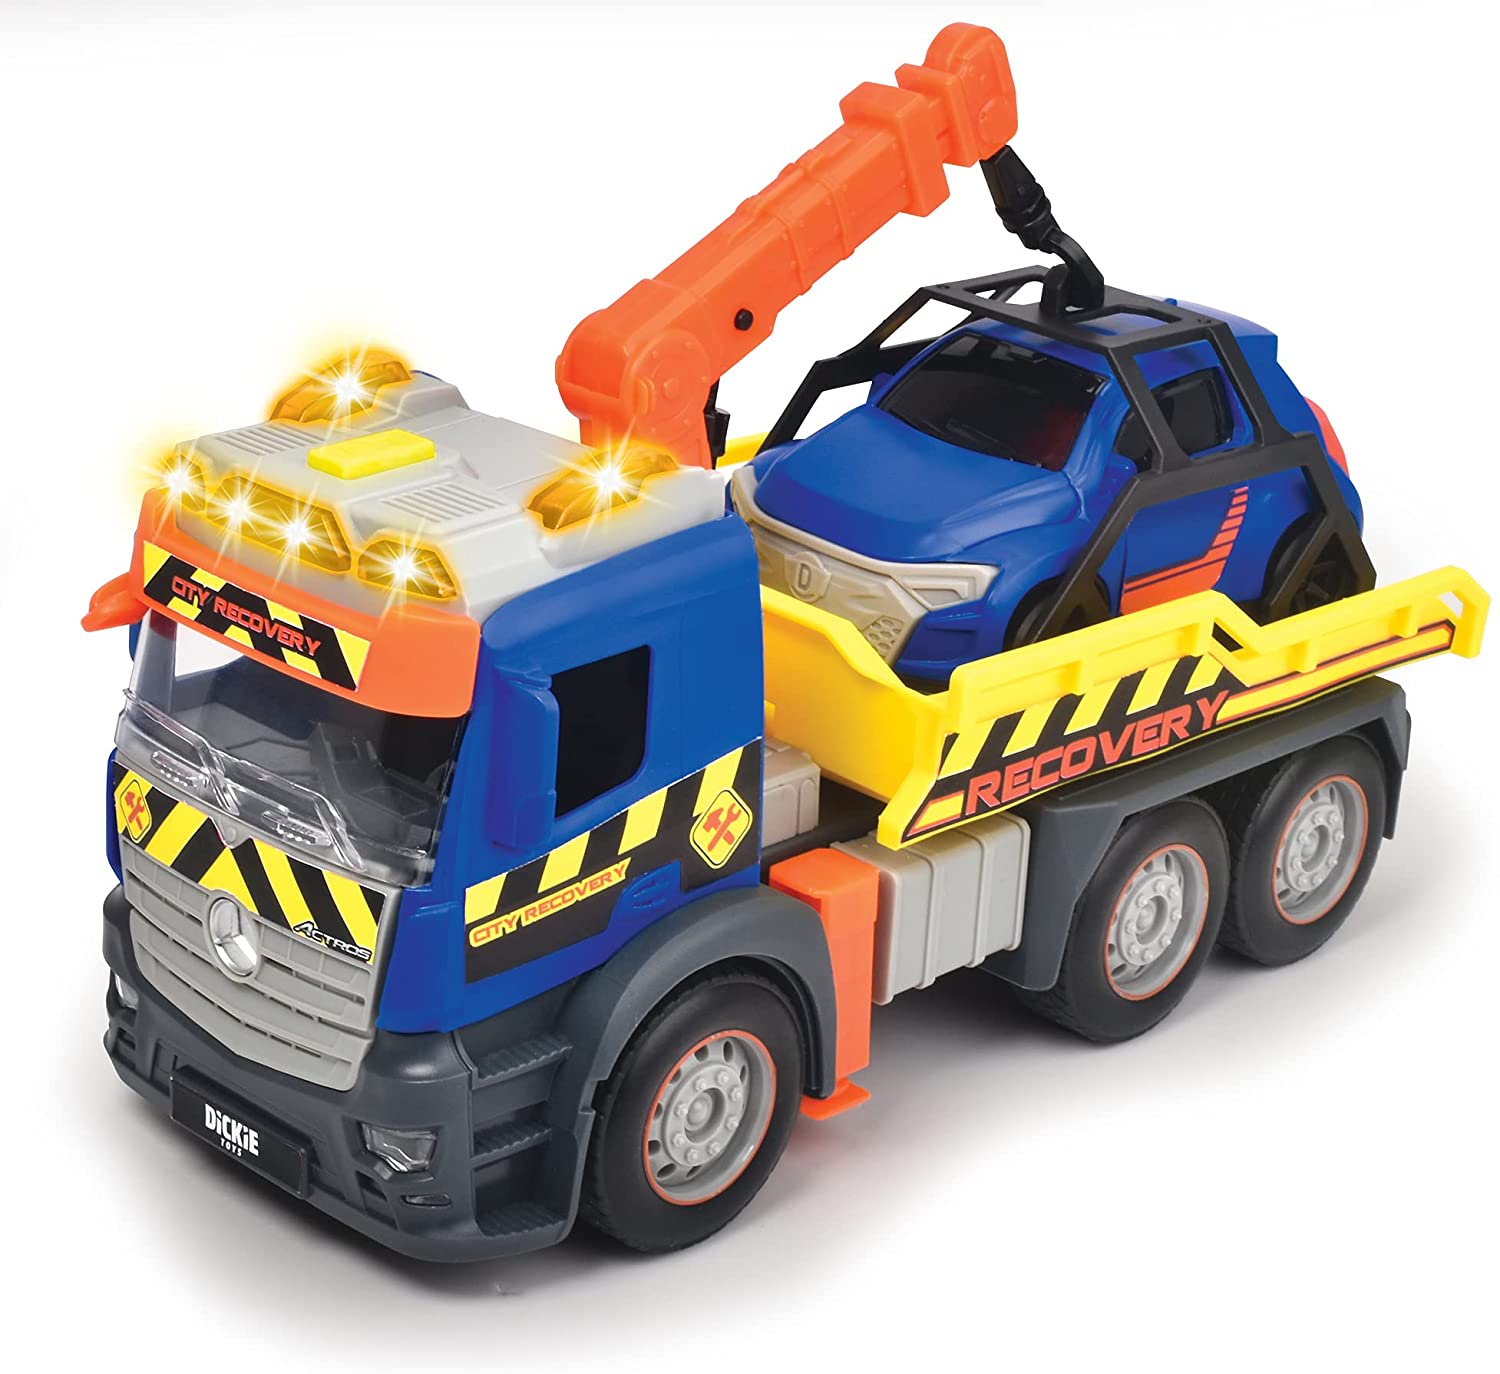 Camion - Recovery - Mercedes, 26 cm | Dickie Toys image5